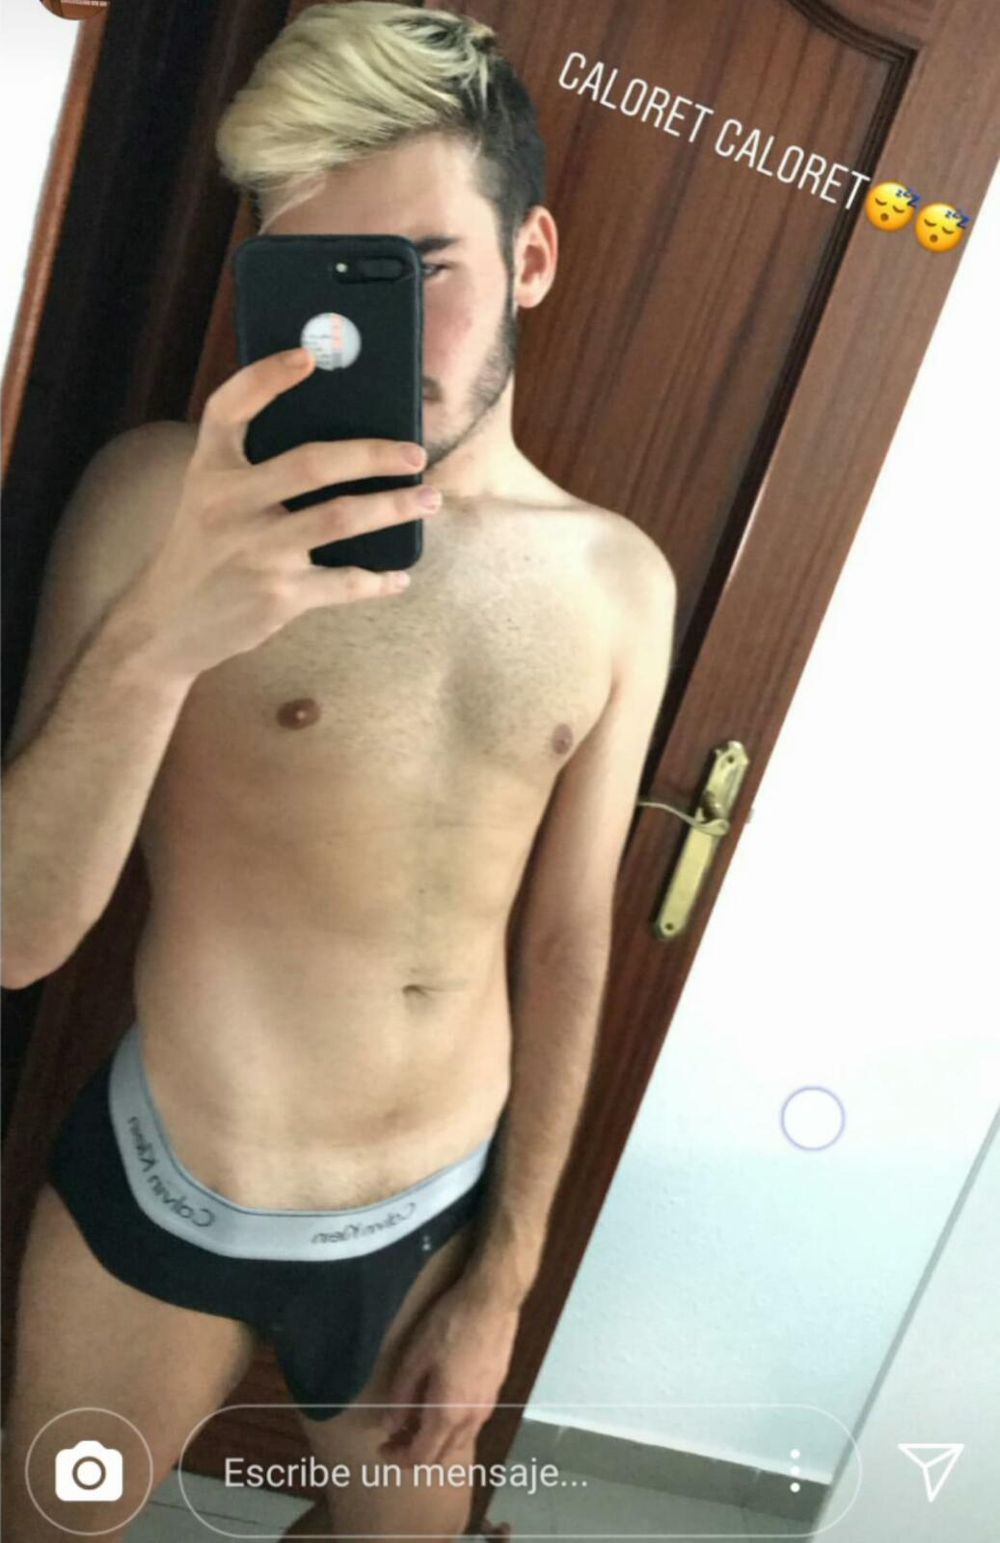 erikdd98 OnlyFans profile picture